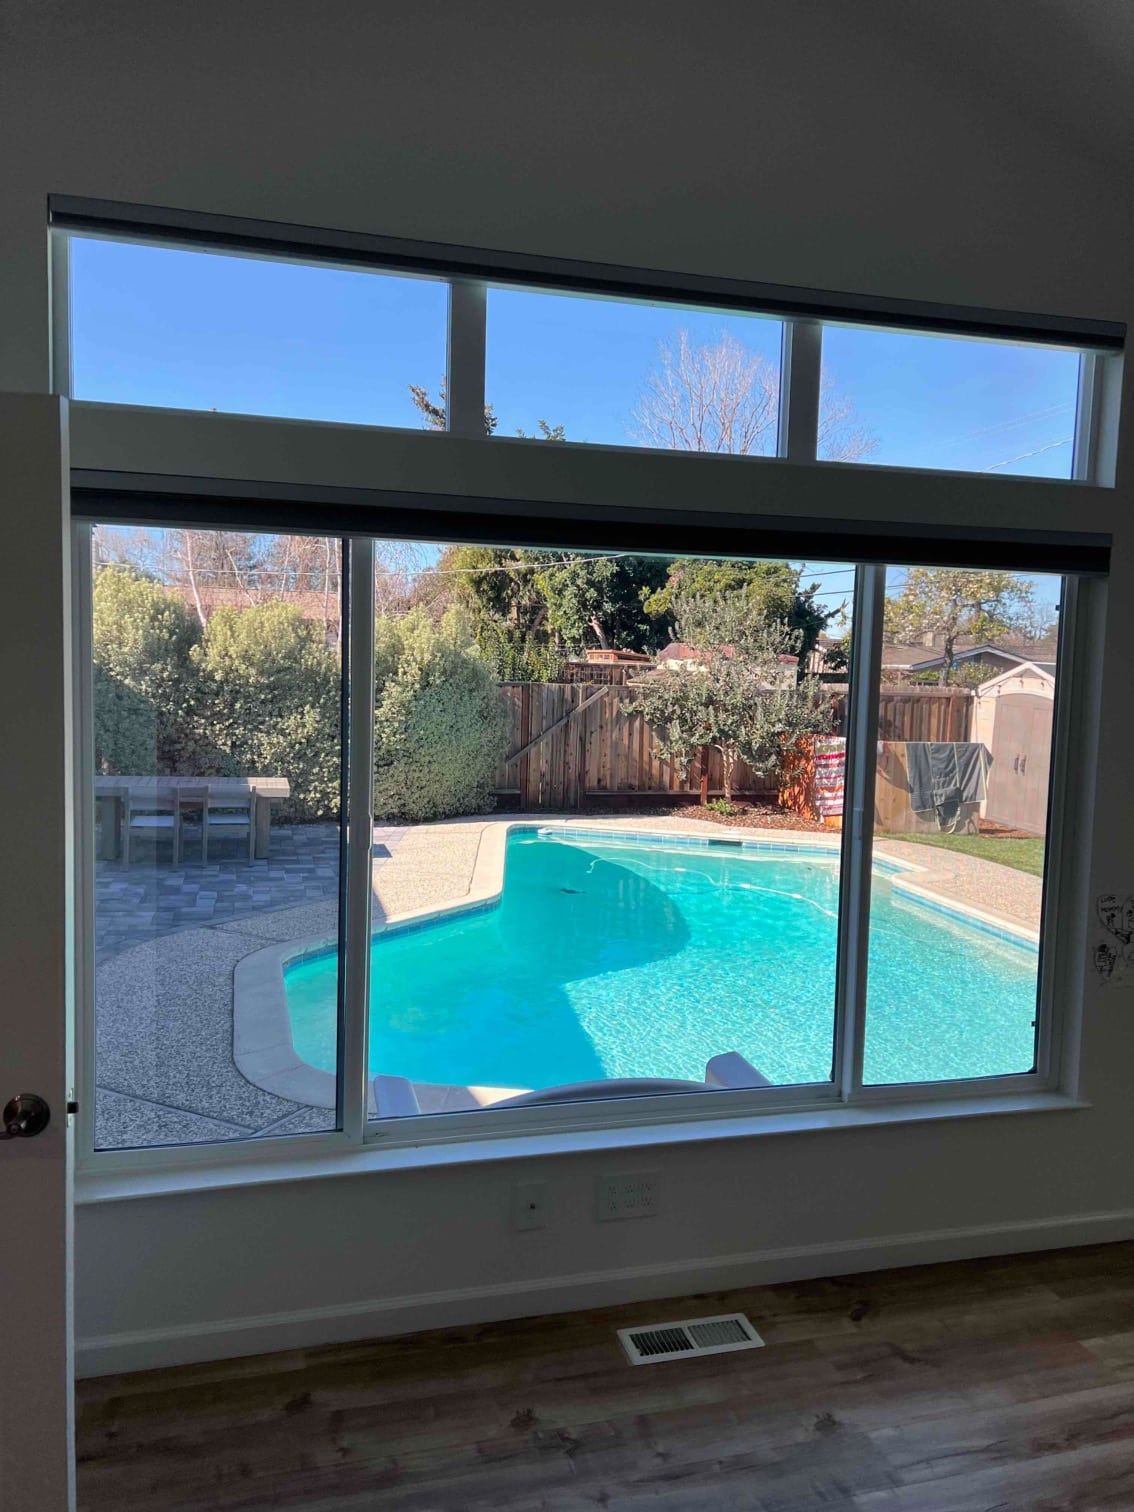 3M Night Vision Window Film for San Jose Homes, installed by ClimatePro